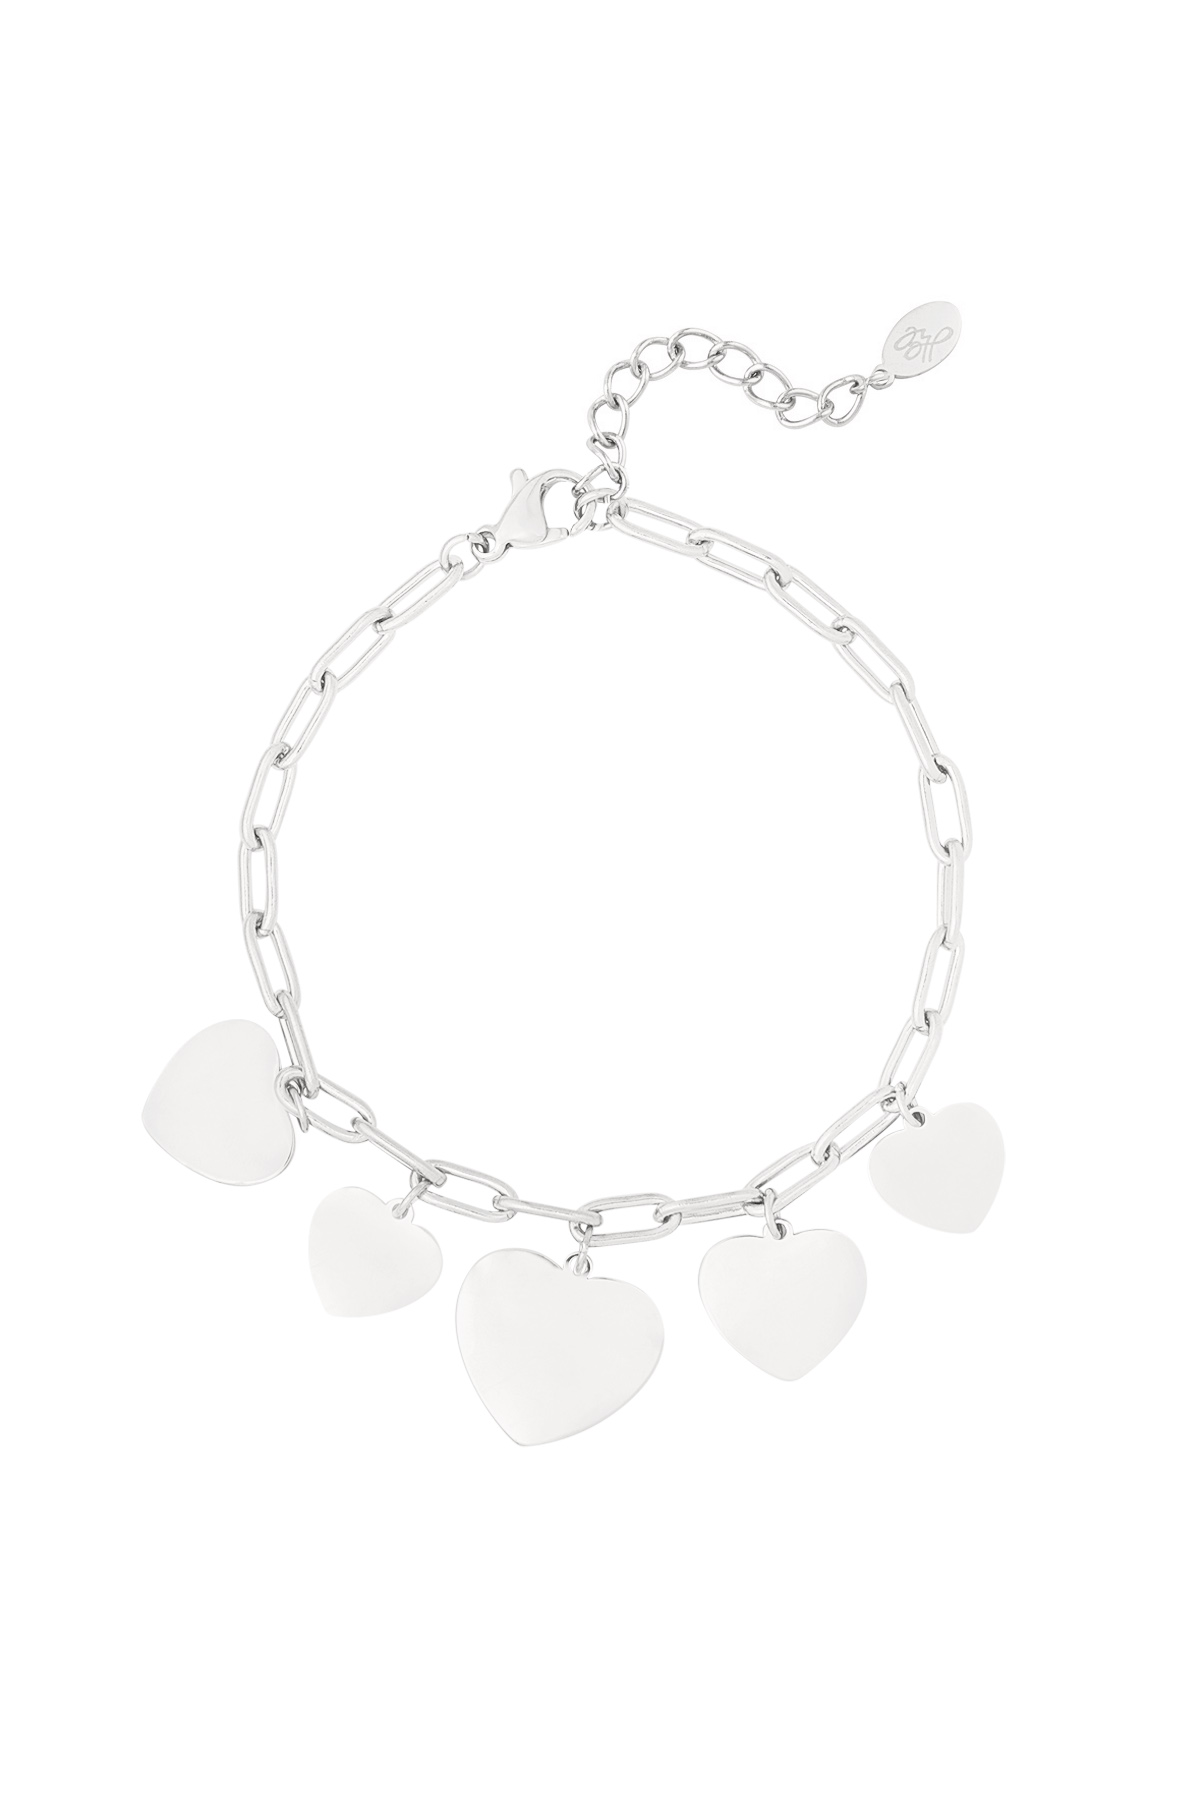 Linked bracelet with heart charms - silver